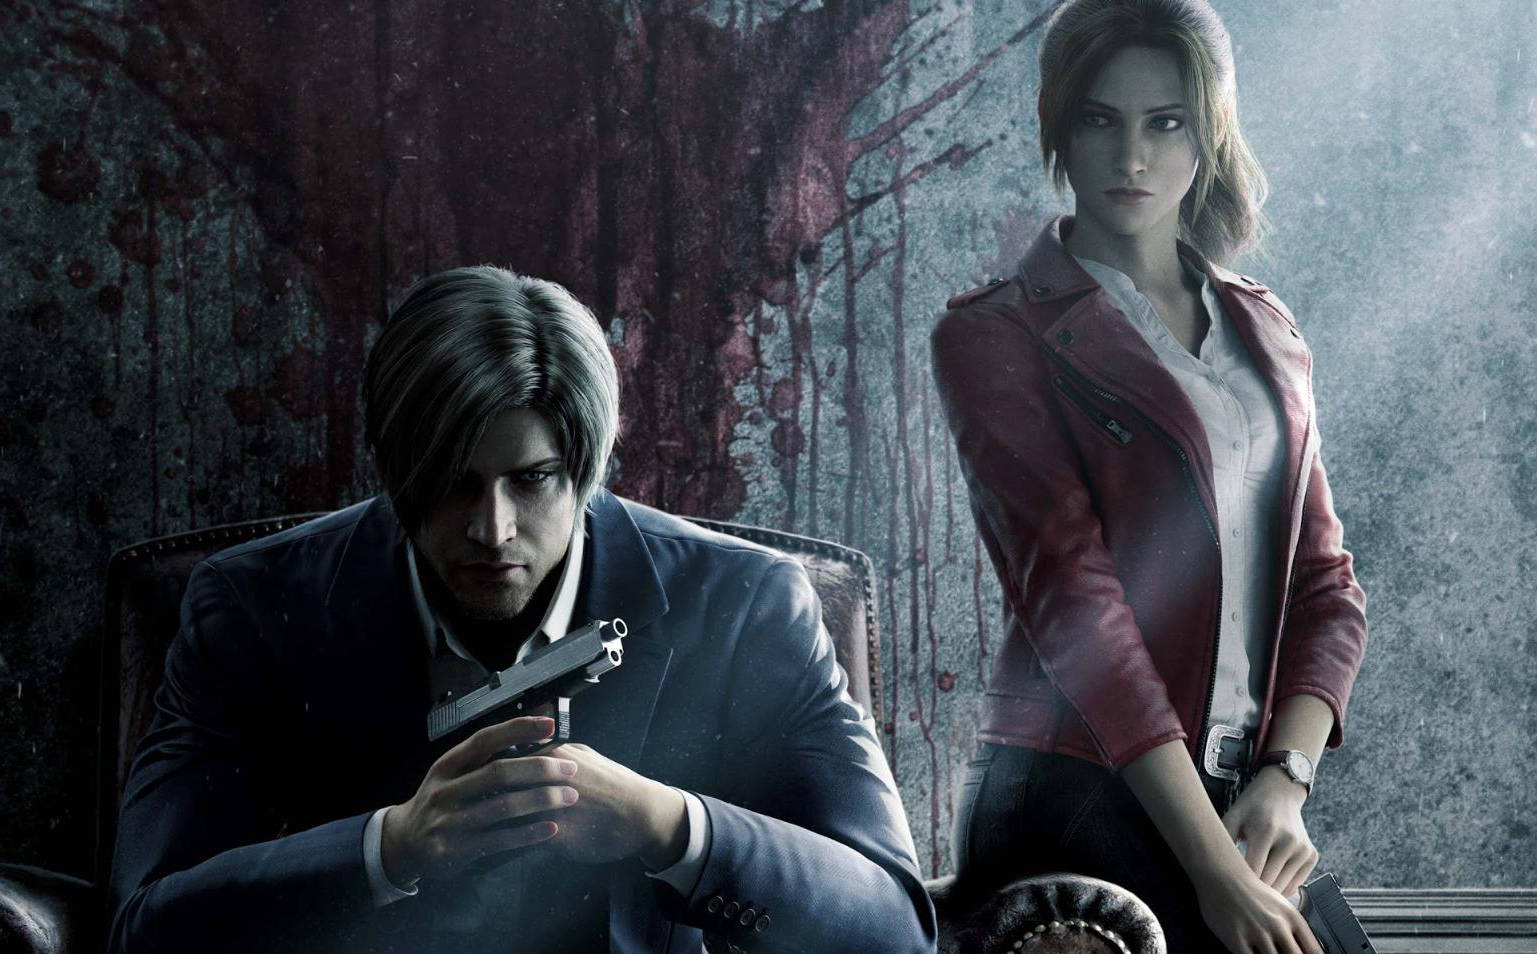 Claire Redfield and Leon Kennedy